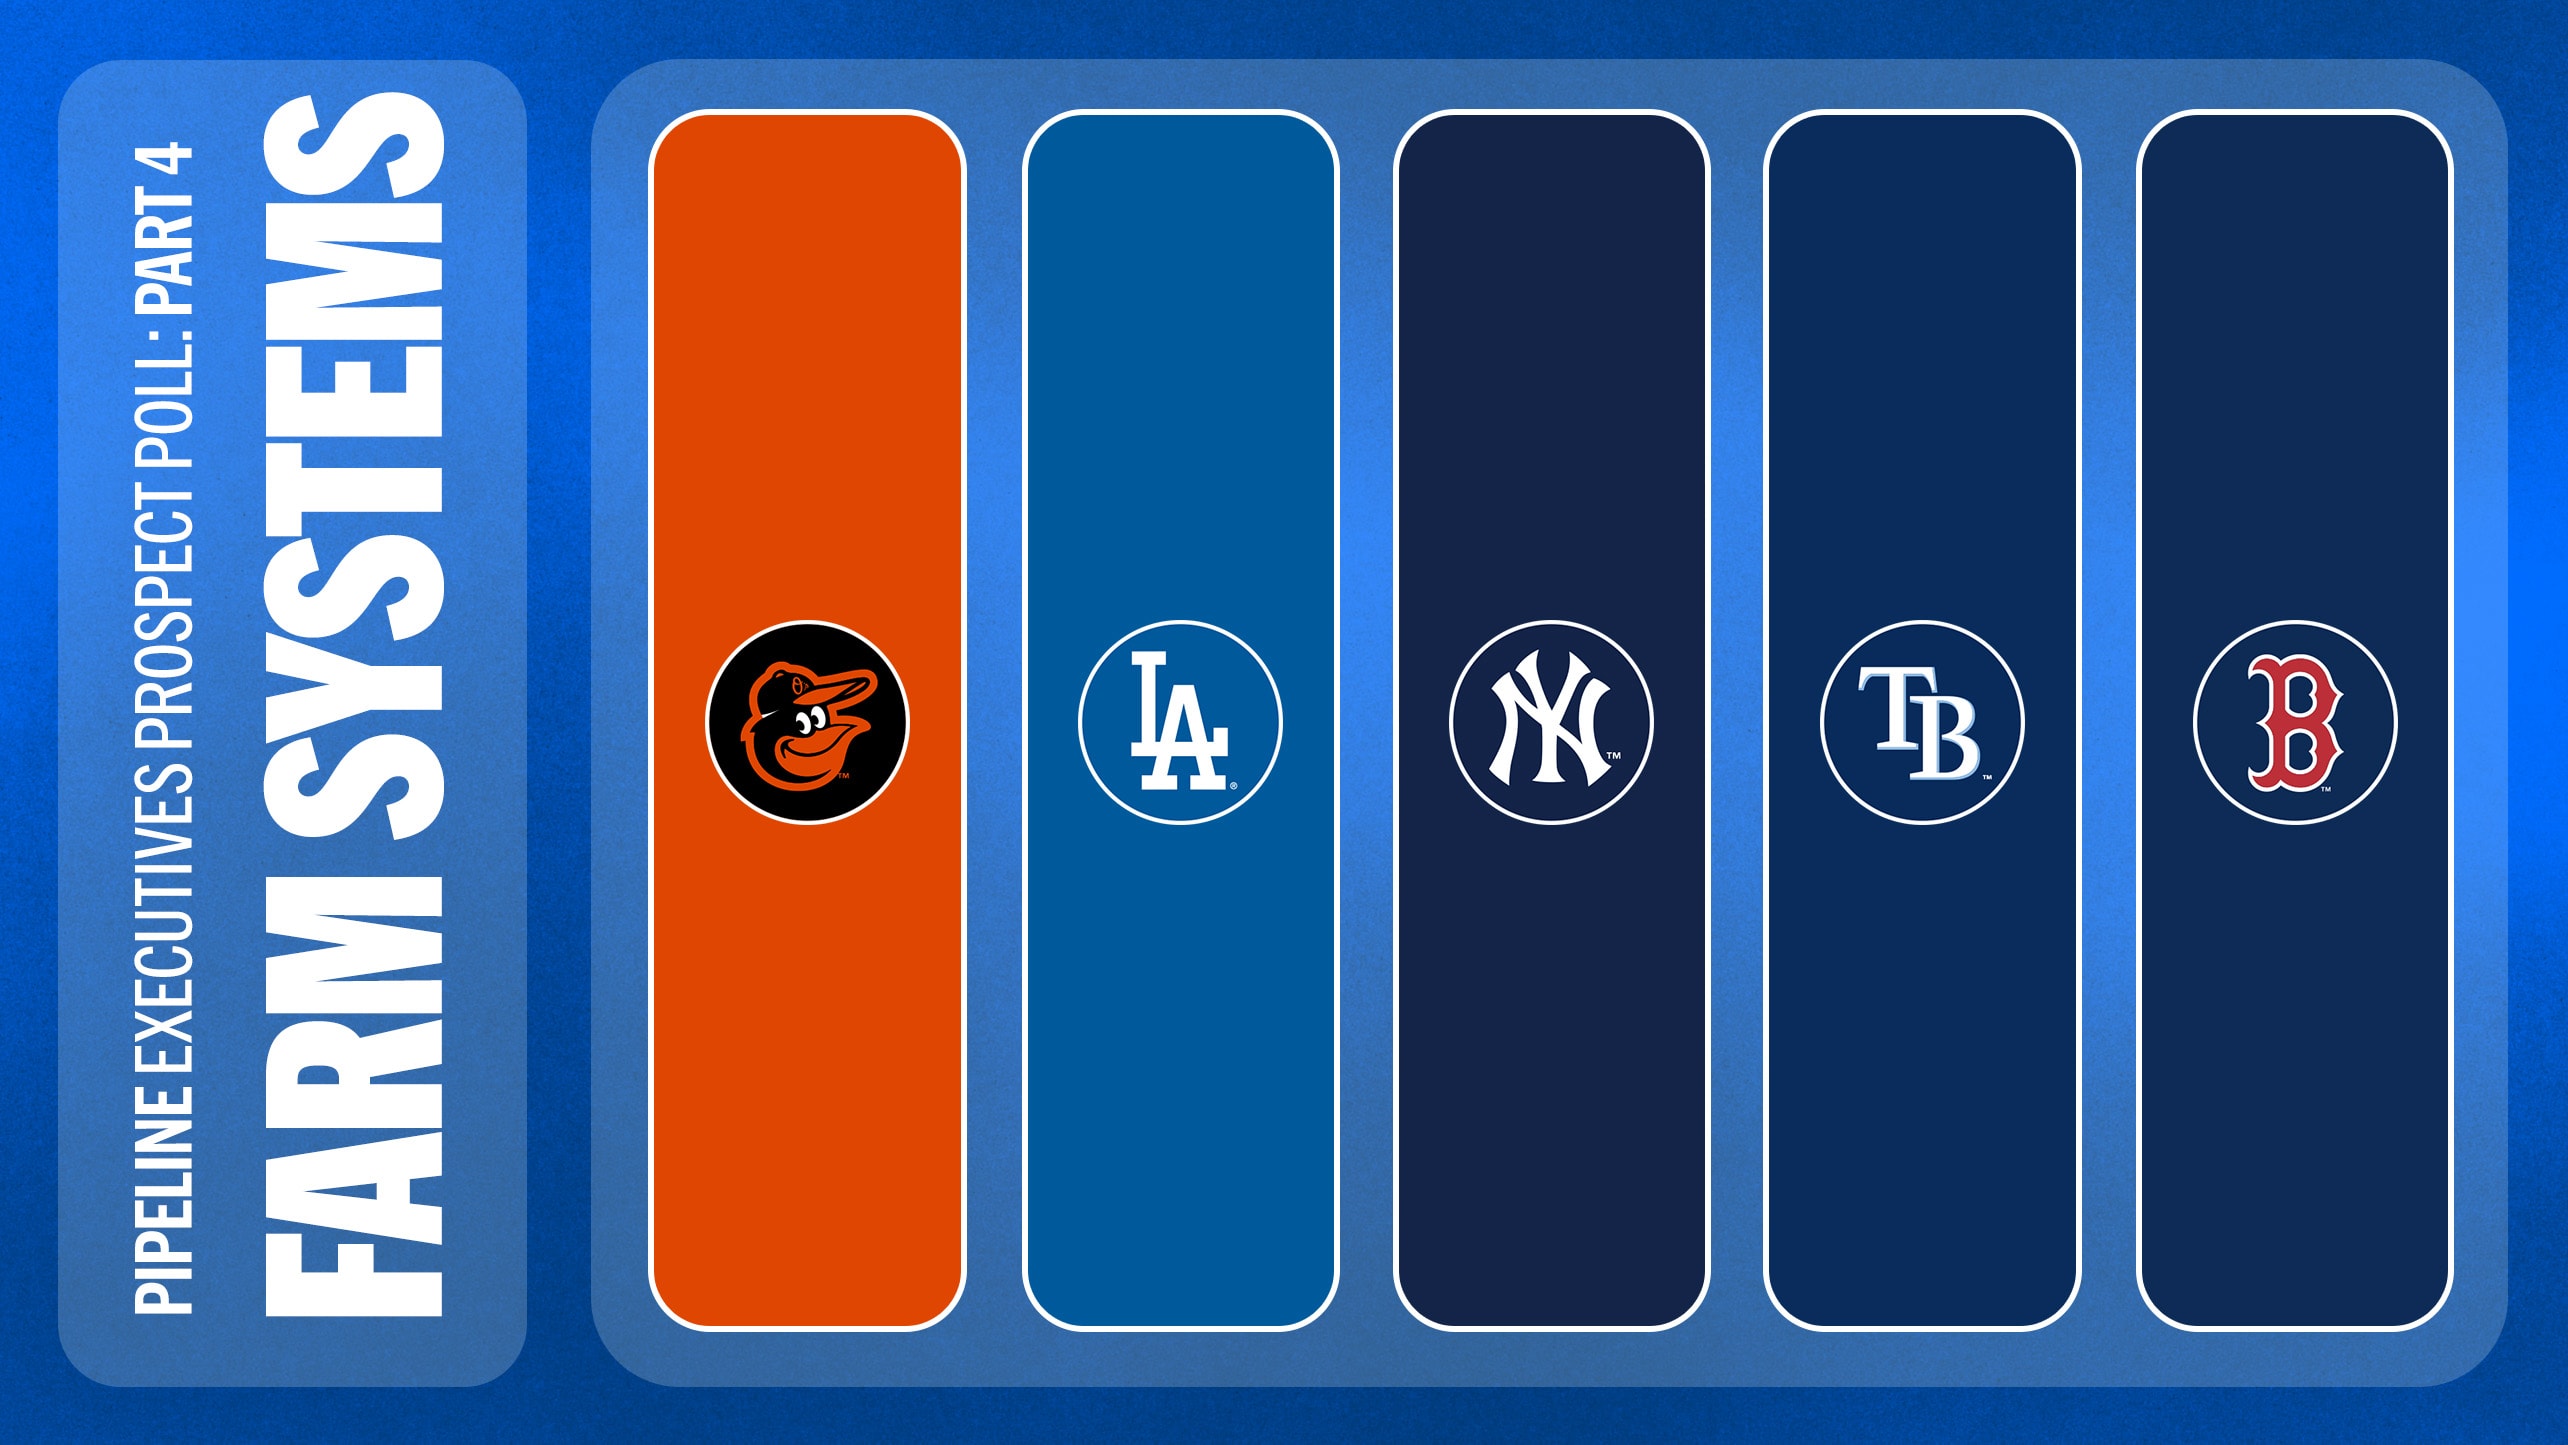 Logos for the O's, Dodgers, Yankees, Rays and Red Sox 